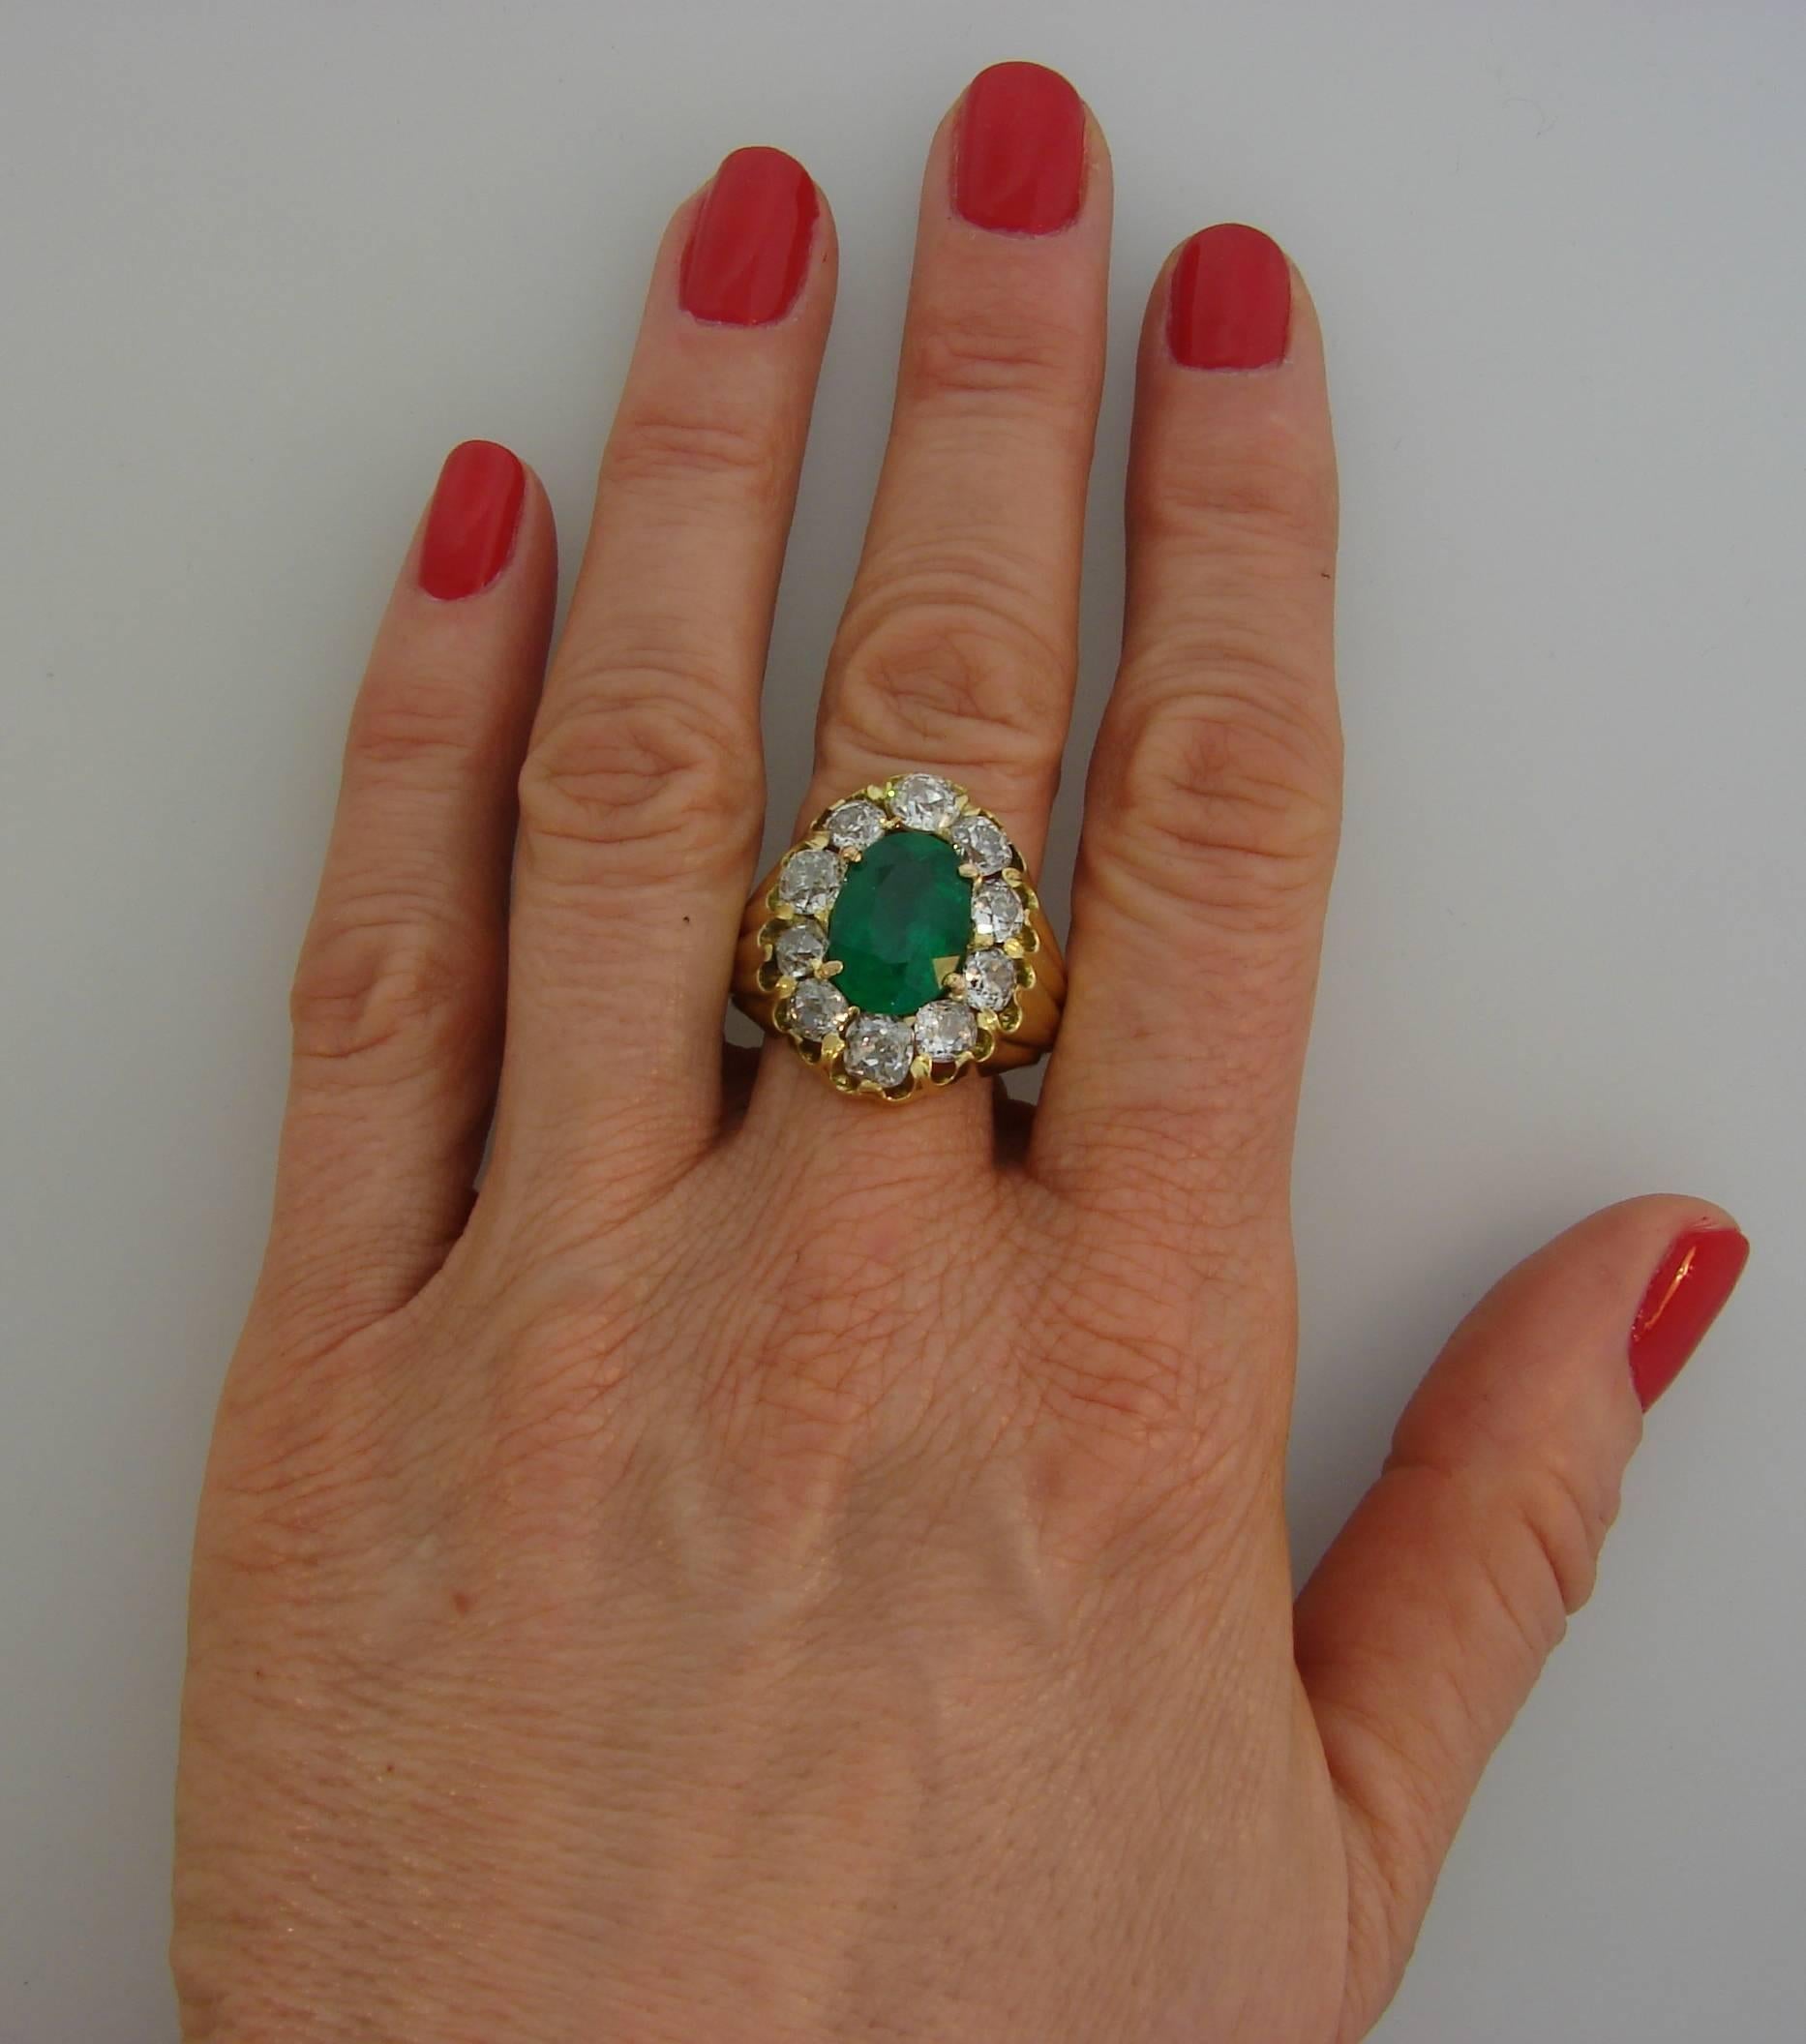 A beautiful ring created in Russian Empire in 1850 (the year of manufacture is stamped on the shank). It is made of yellow gold, and features a 4.65-carat oval faceted emerald framed with ten cushion cut diamonds (H-I color, VS2-SI1 clarity, total